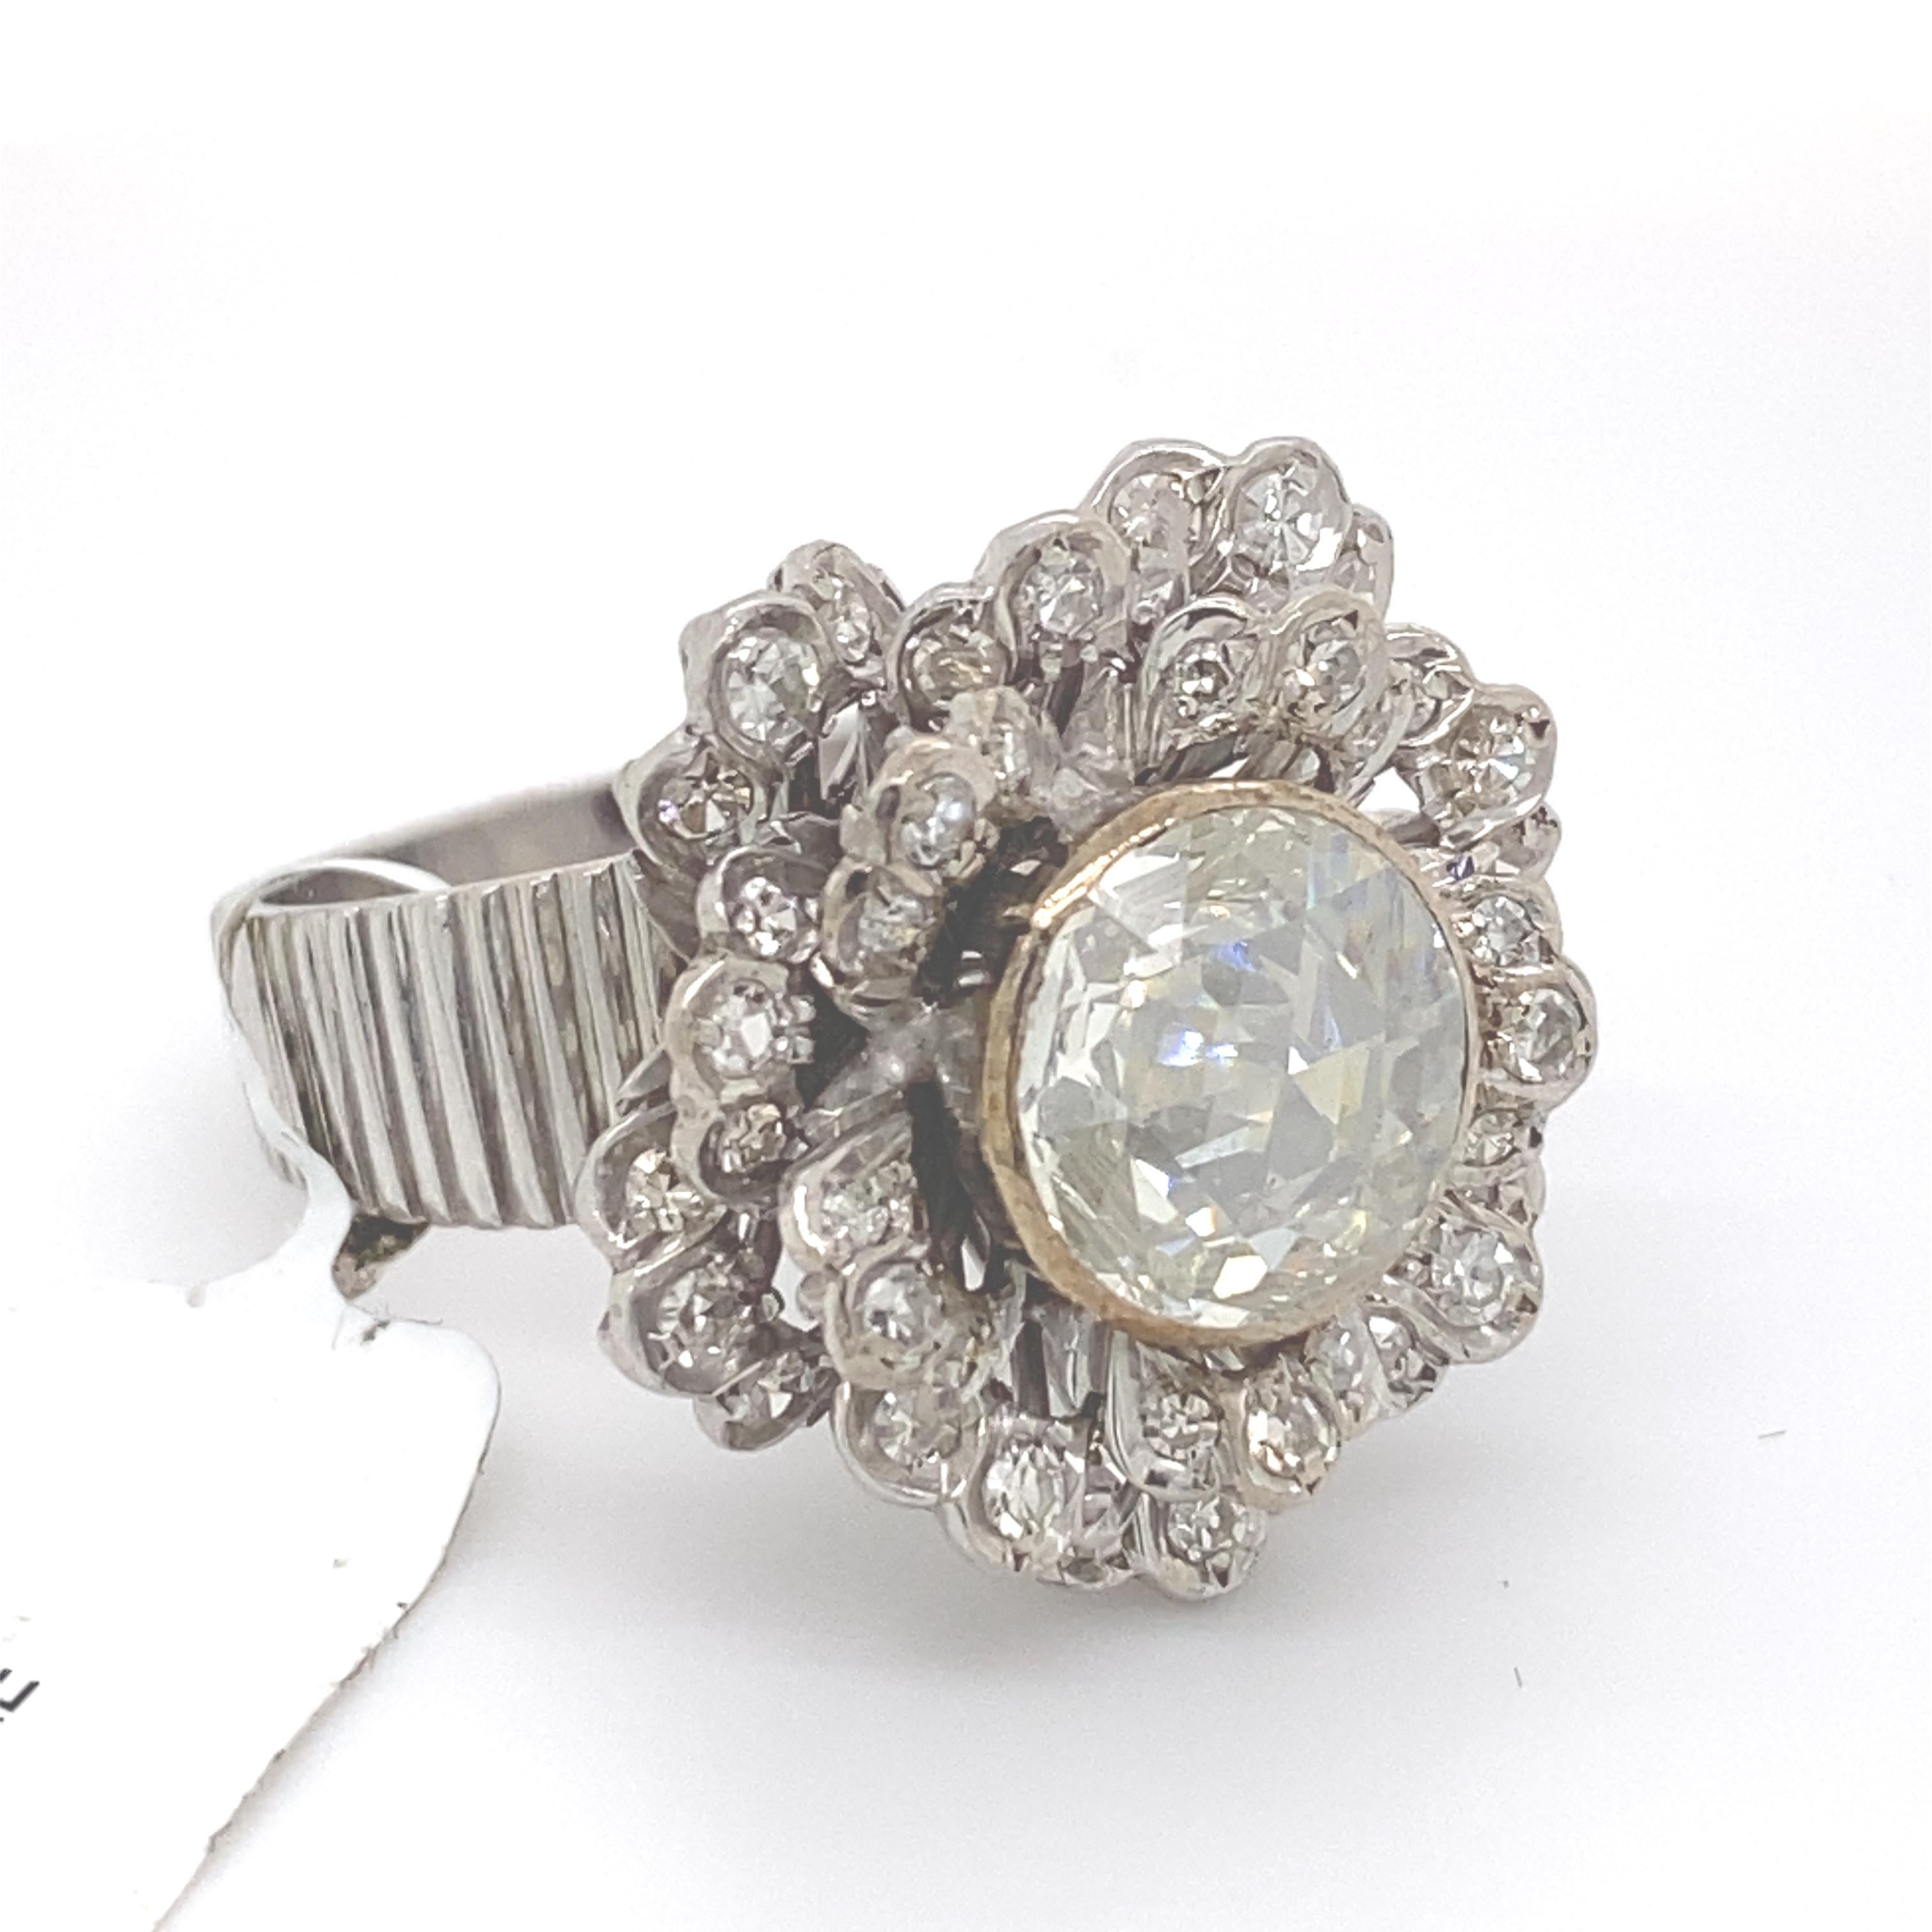 Women's Vintage Victorian Style Apx 2.75 Carat Rose Cut Diamond Ring with Halo